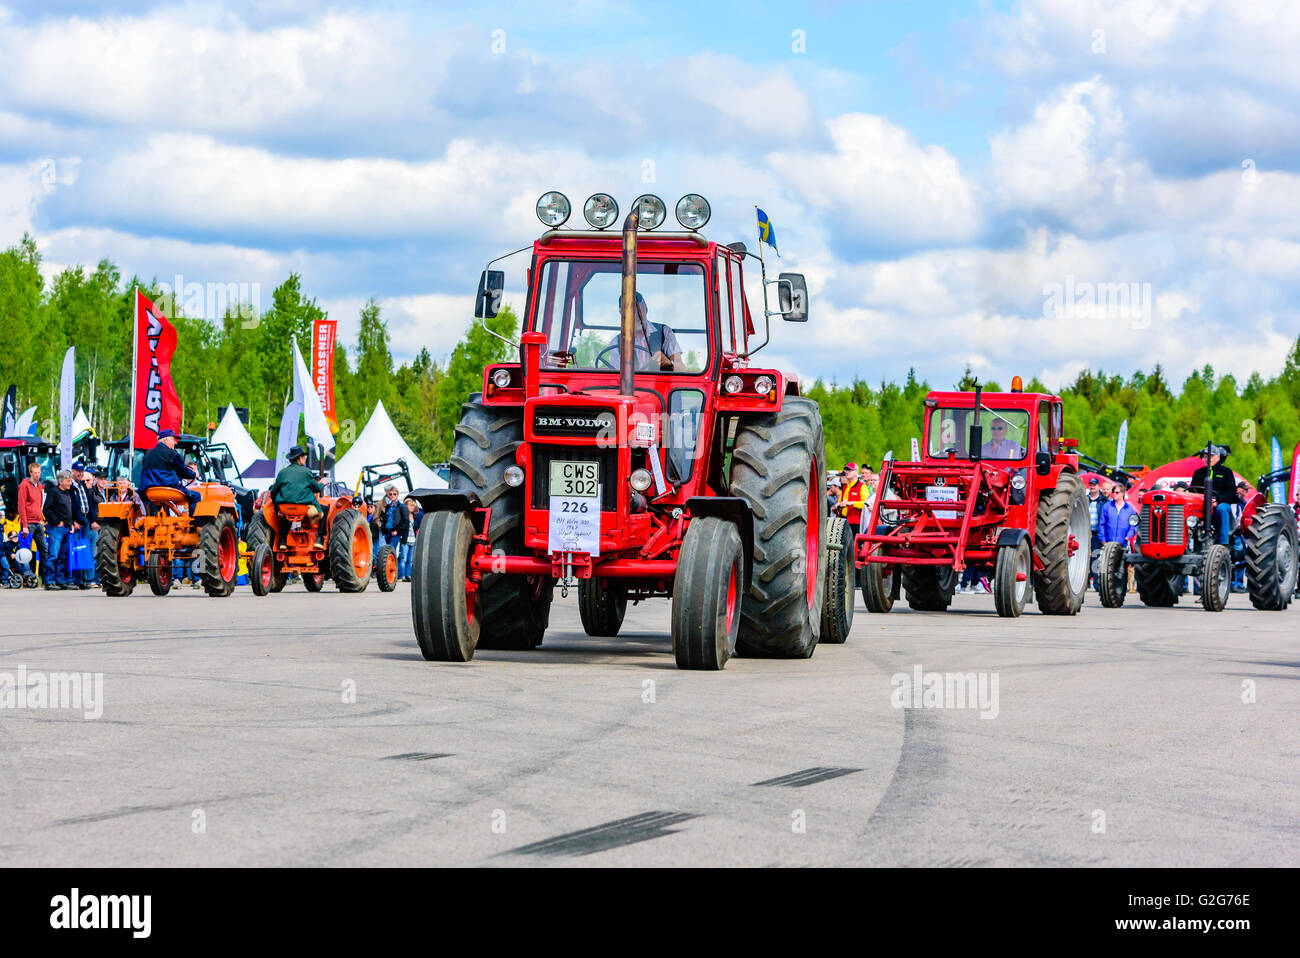 Emmaboda, Sweden - May 14, 2016: Forest and tractor (Skog och traktor) fair. Vintage classic tractors on parade. Here a red 1967 Stock Photo